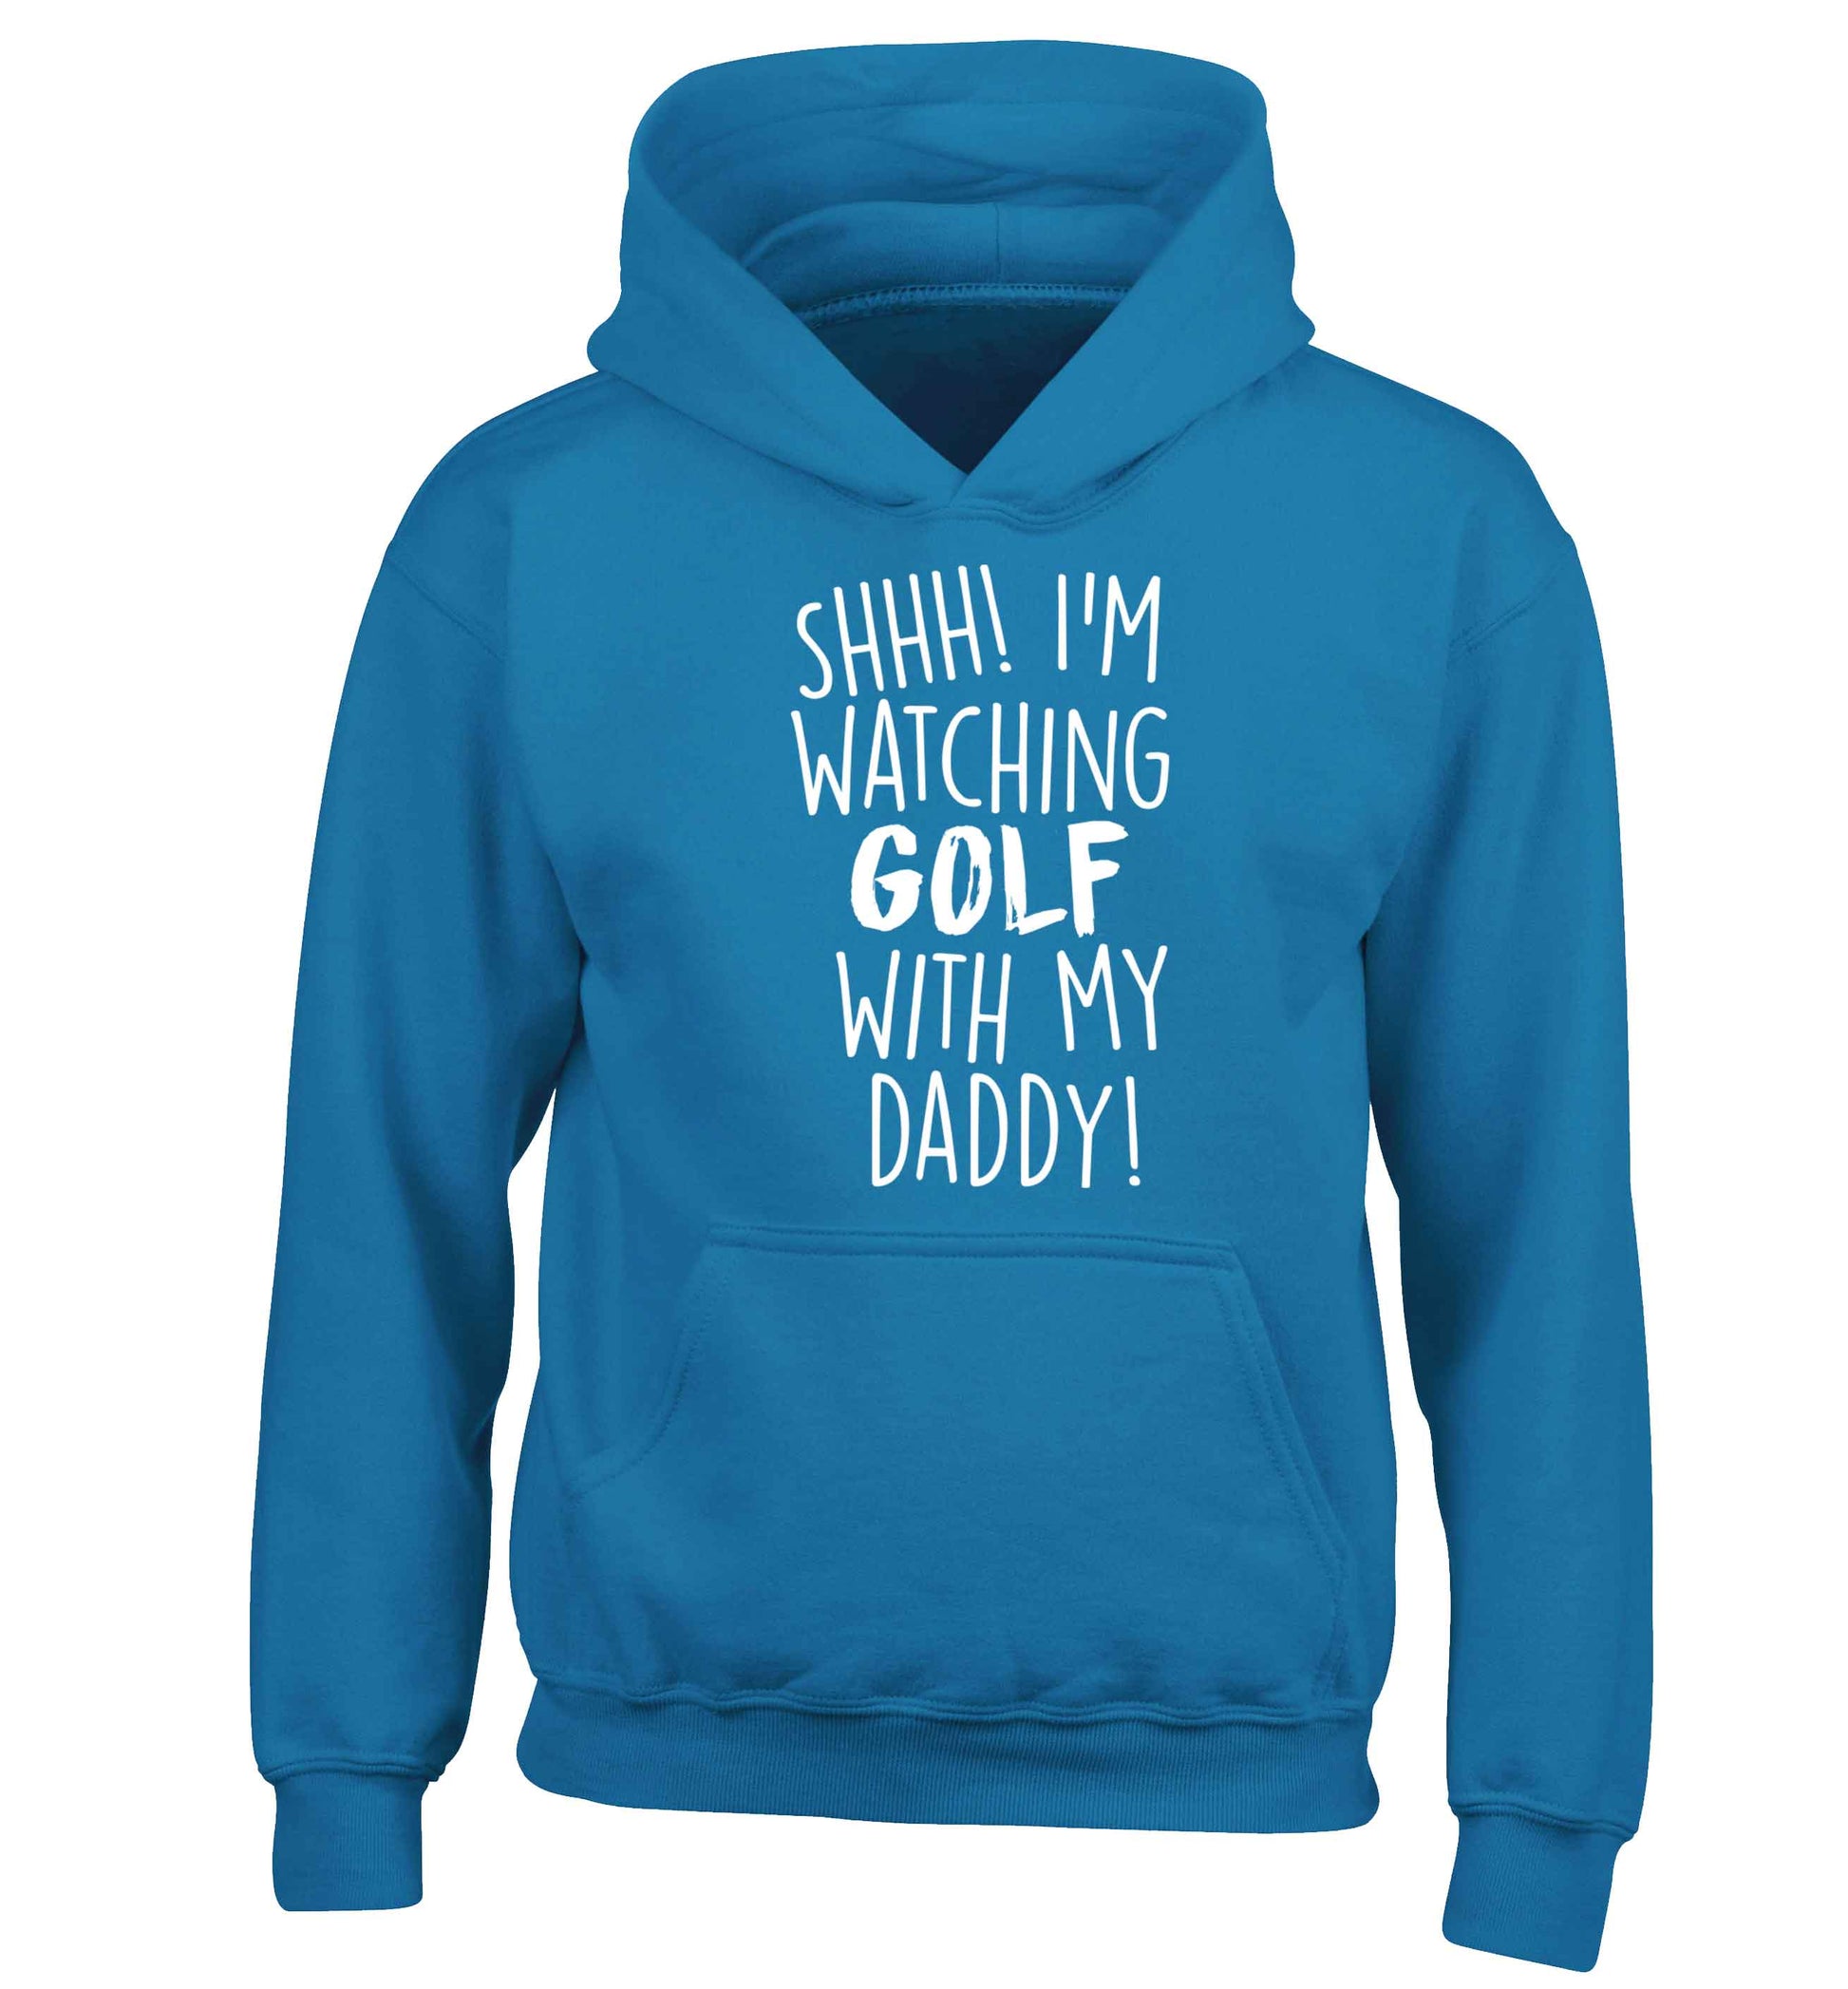 Shh I'm watching golf with my daddy children's blue hoodie 12-13 Years